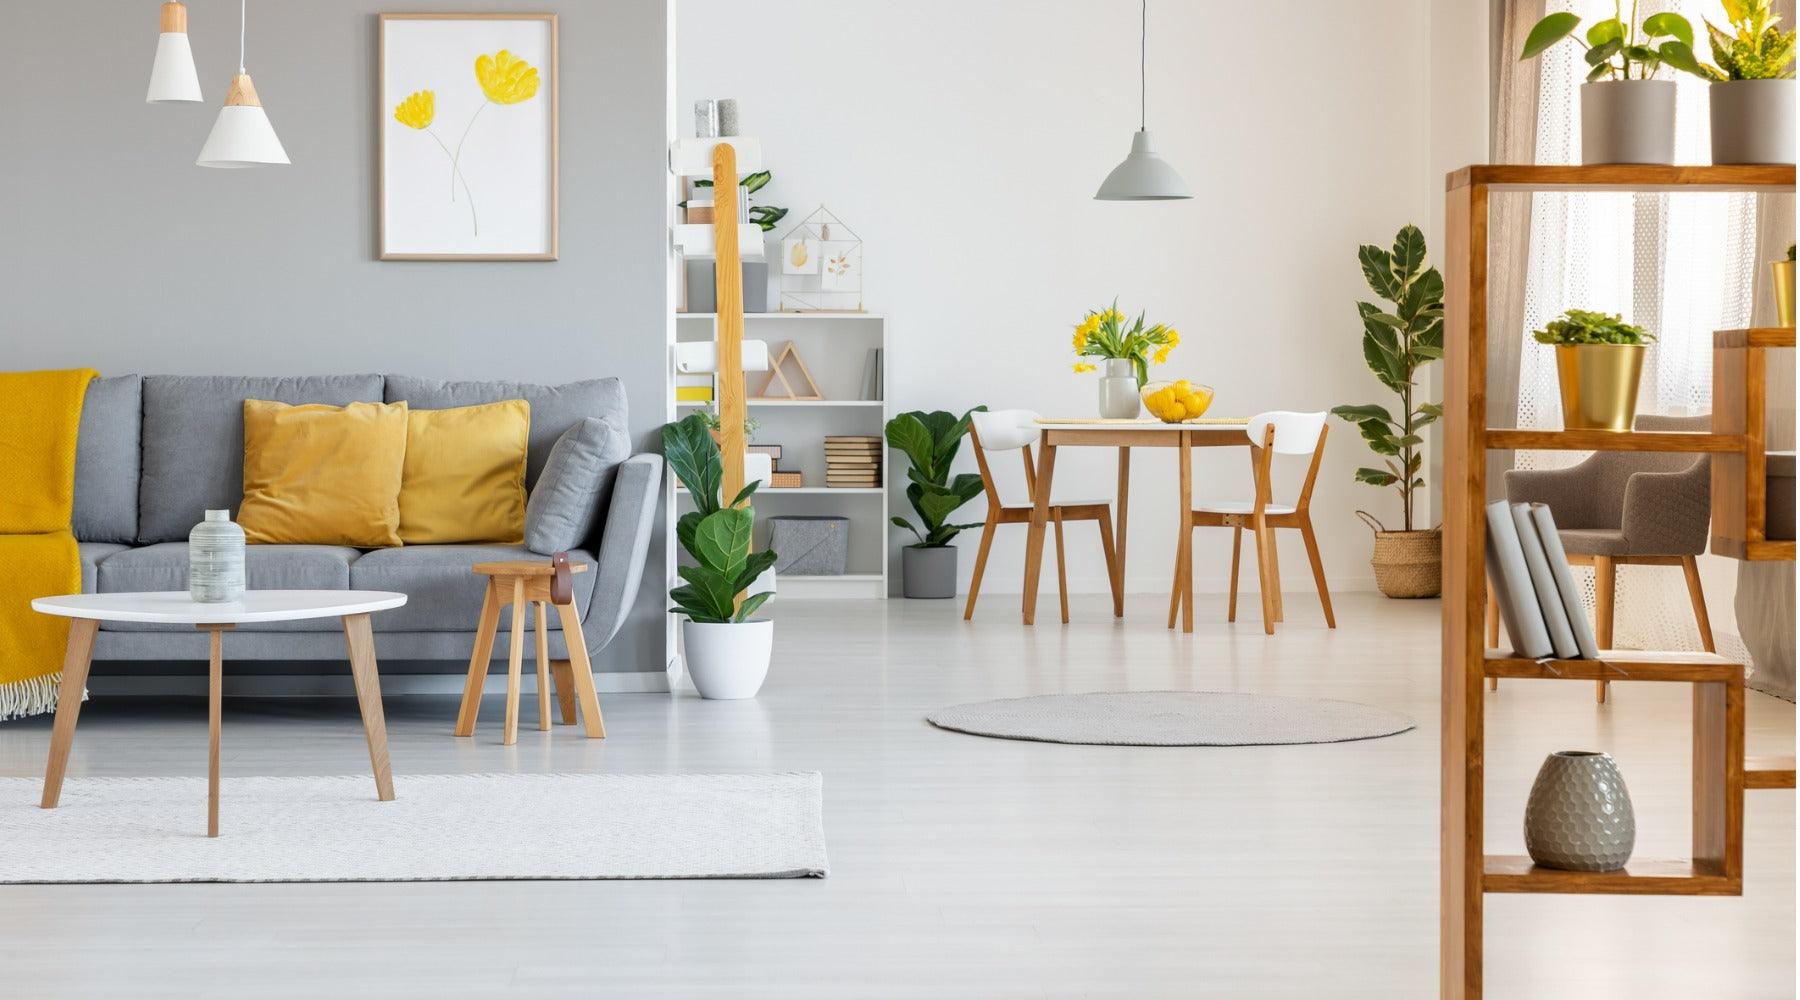 Scandi Finishing Touches: How To Make a Big Impact With Little Details